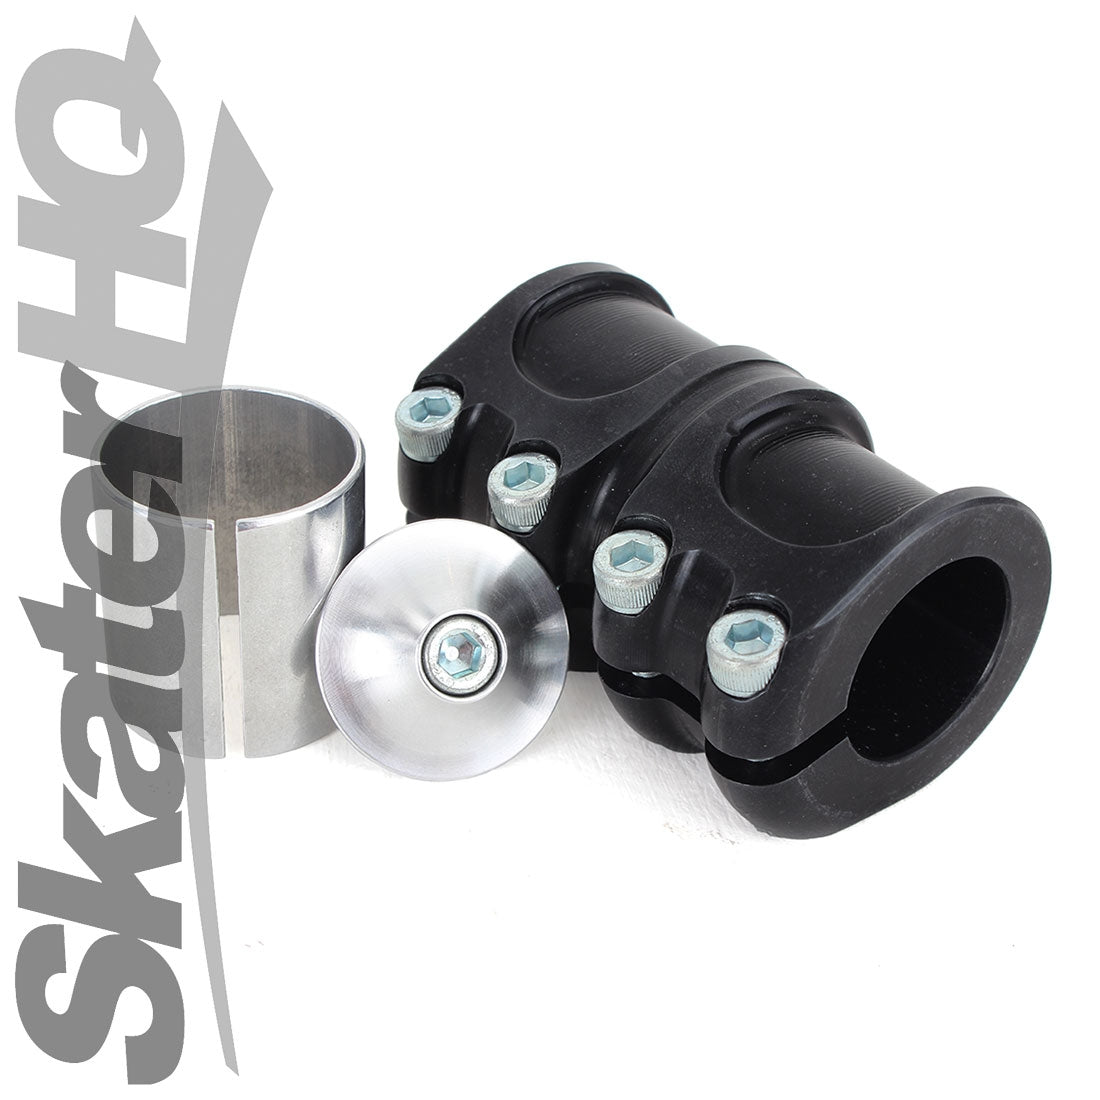 Apex SCS Lite Clamp - Black Scooter Headsets and Clamps